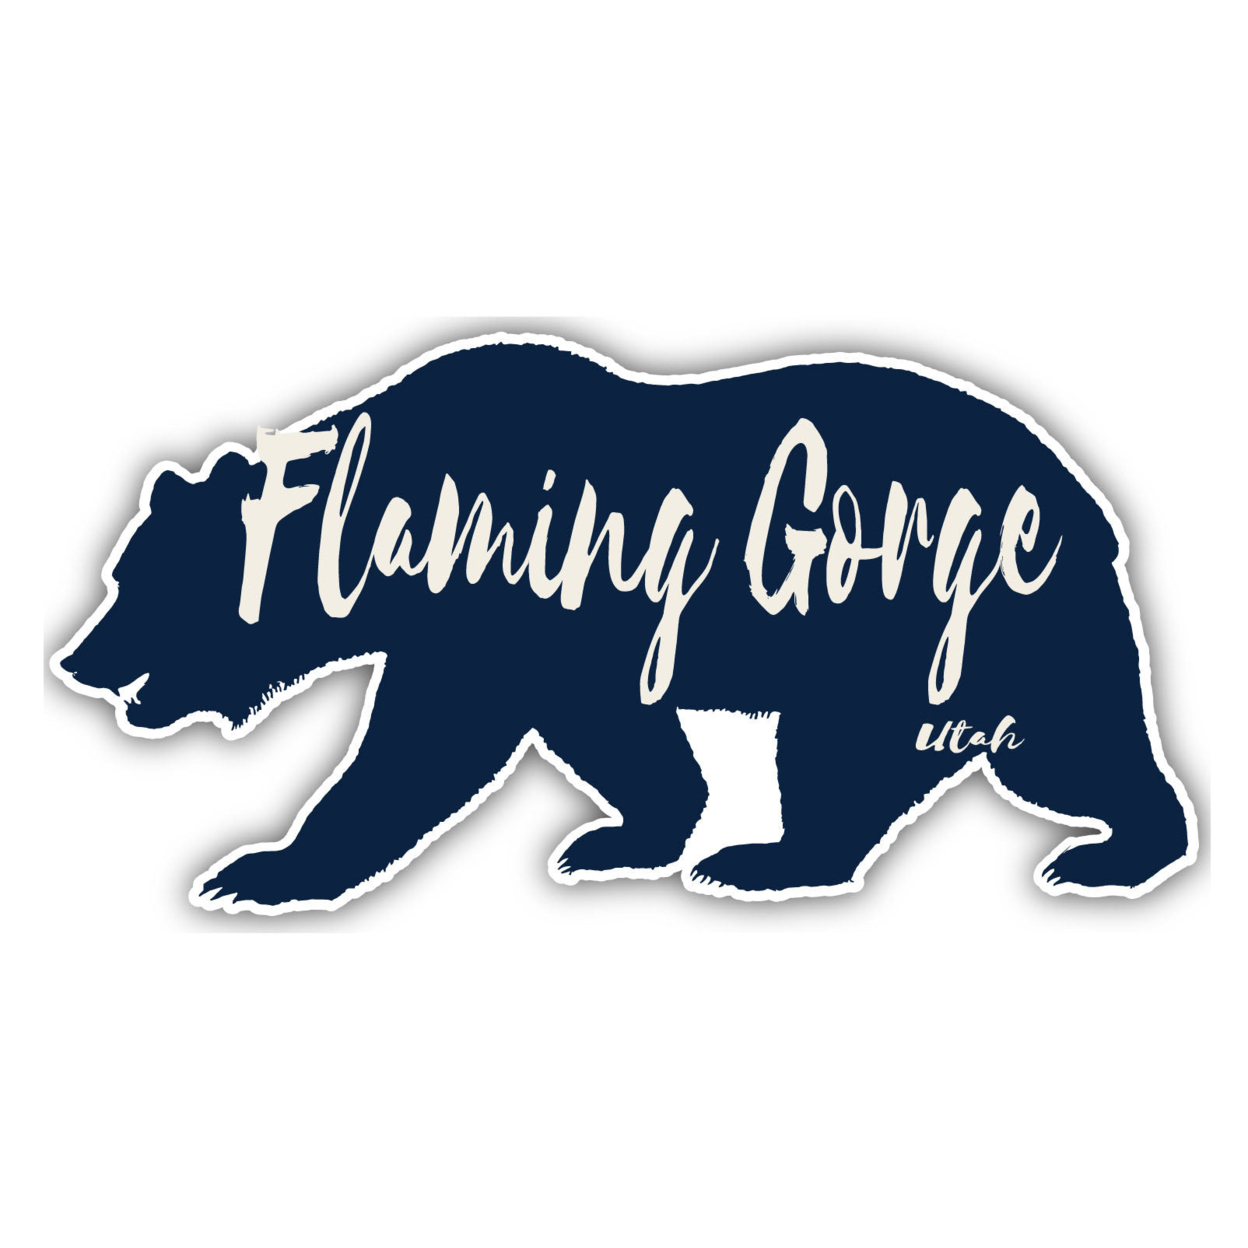 Flaming Gorge Utah Souvenir Decorative Stickers (Choose Theme And Size) - 4-Pack, 4-Inch, Bear